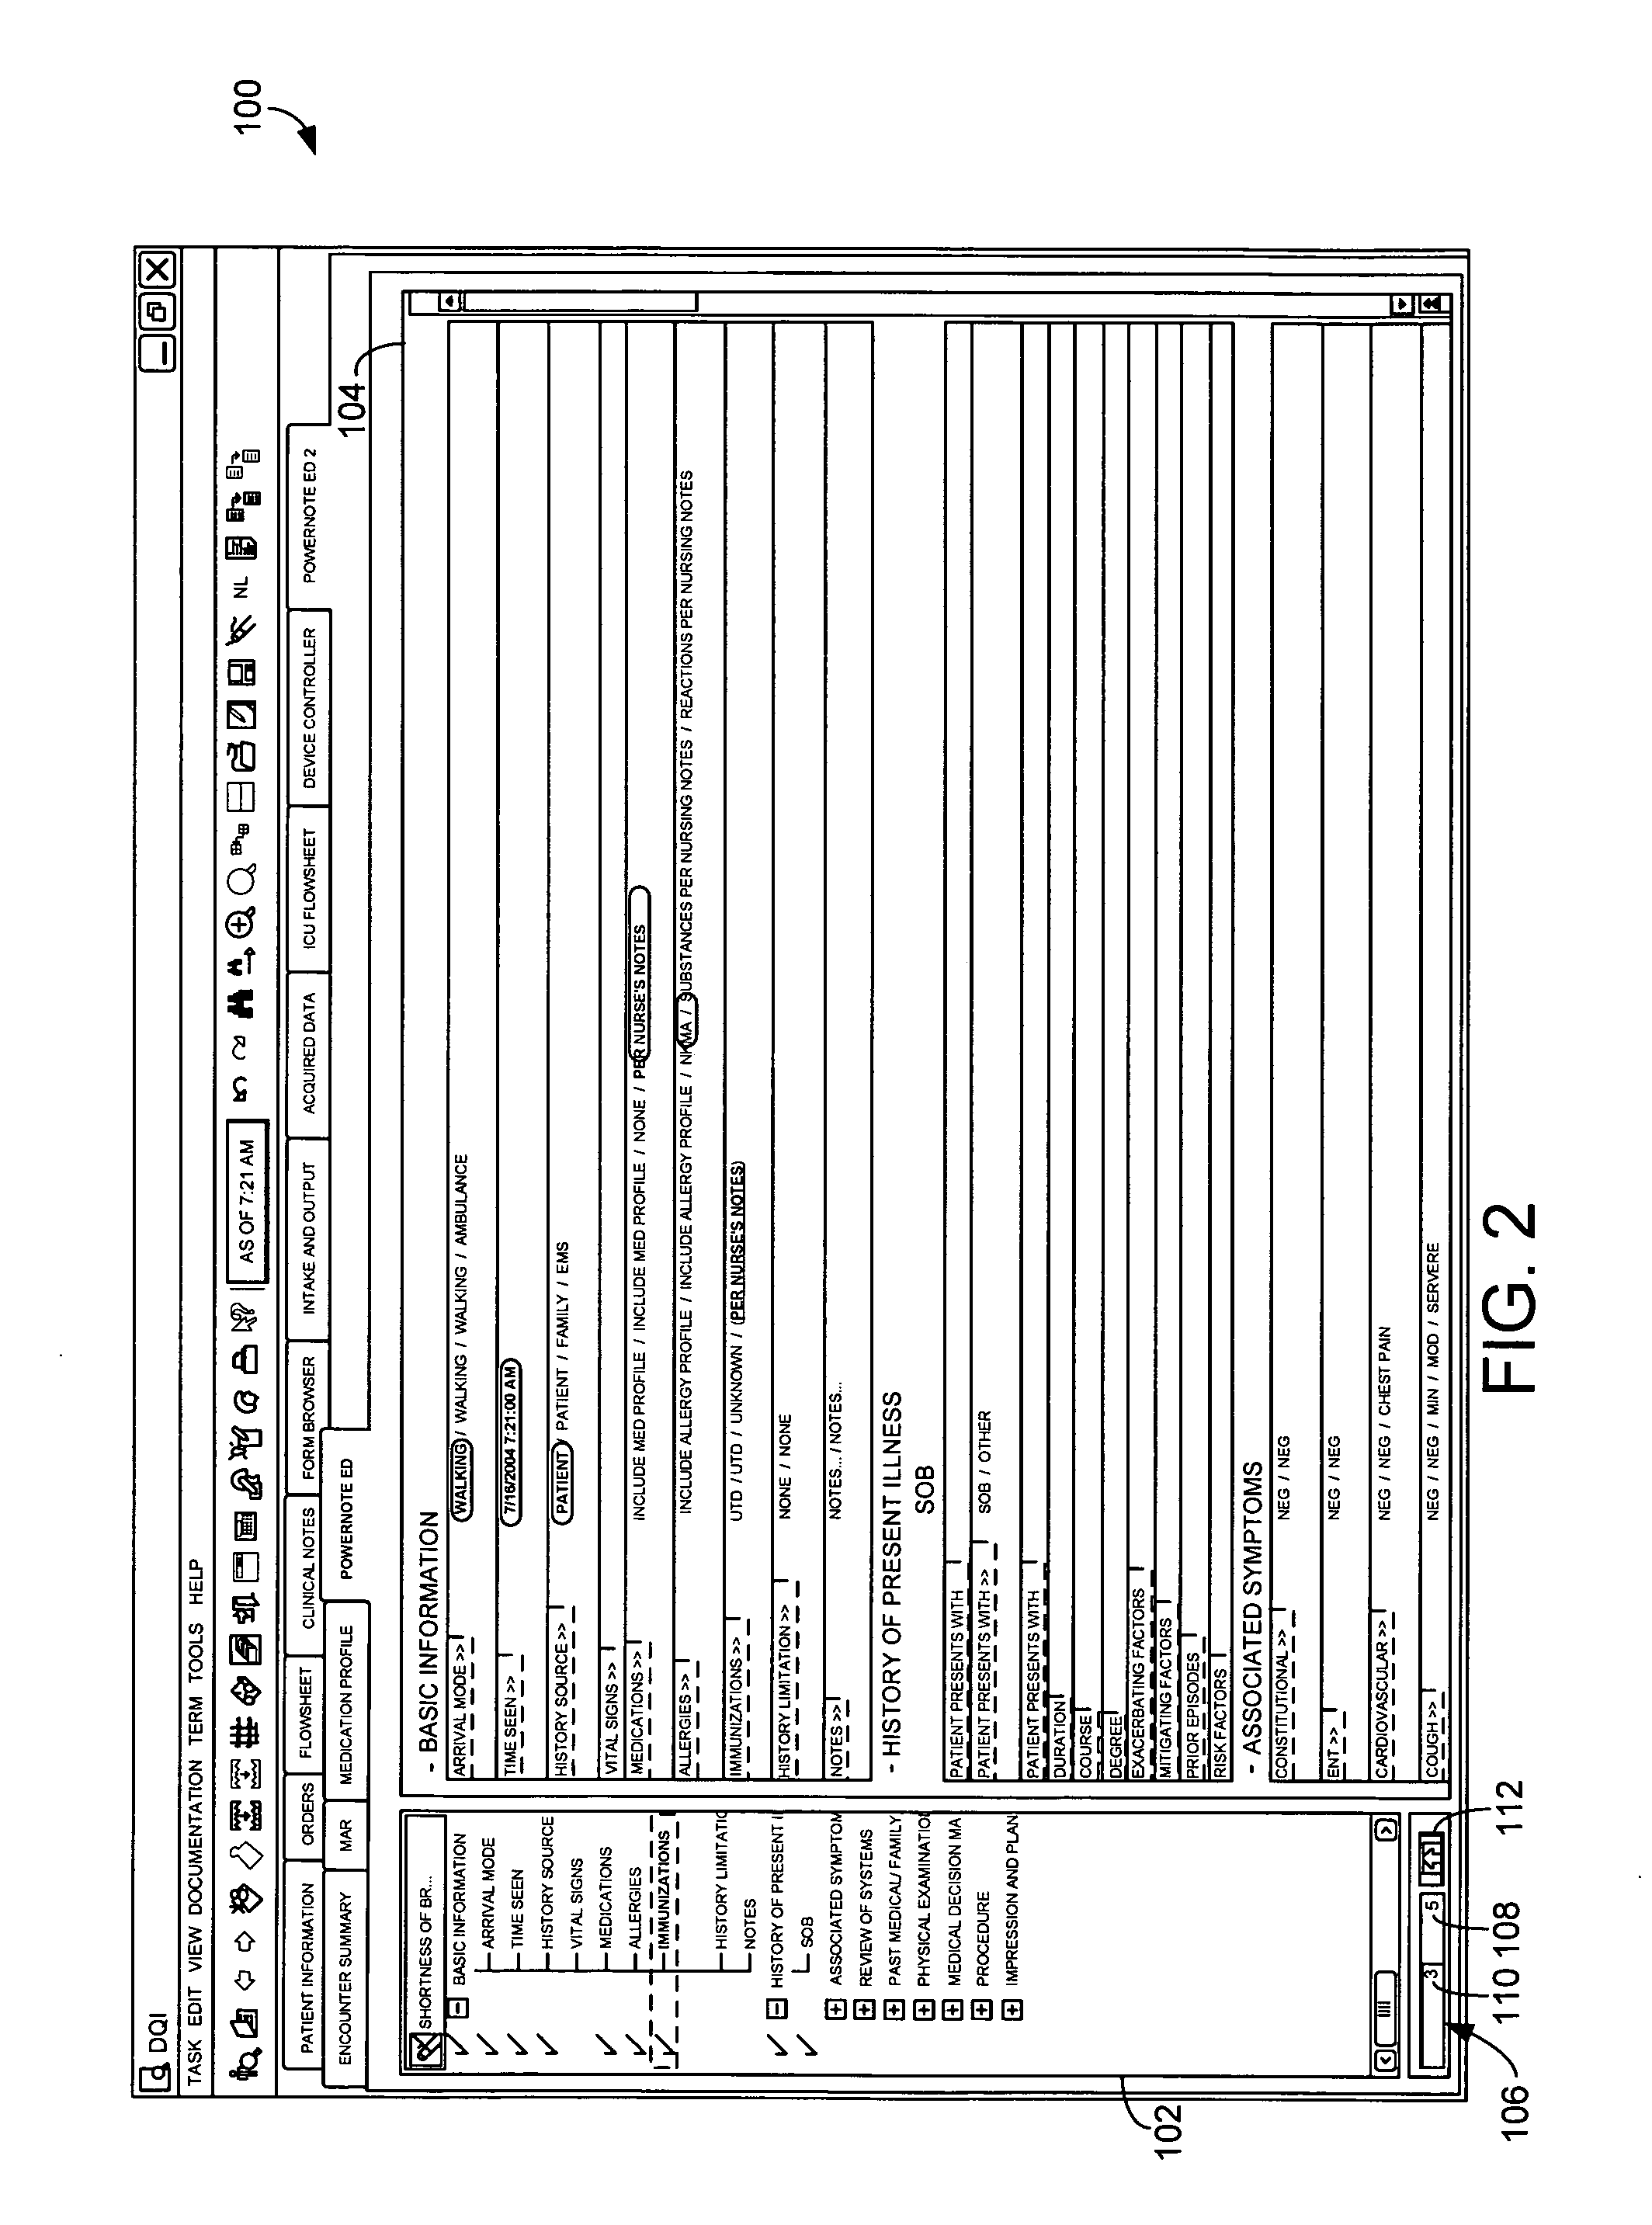 Computerized method and system for coding-based navigation